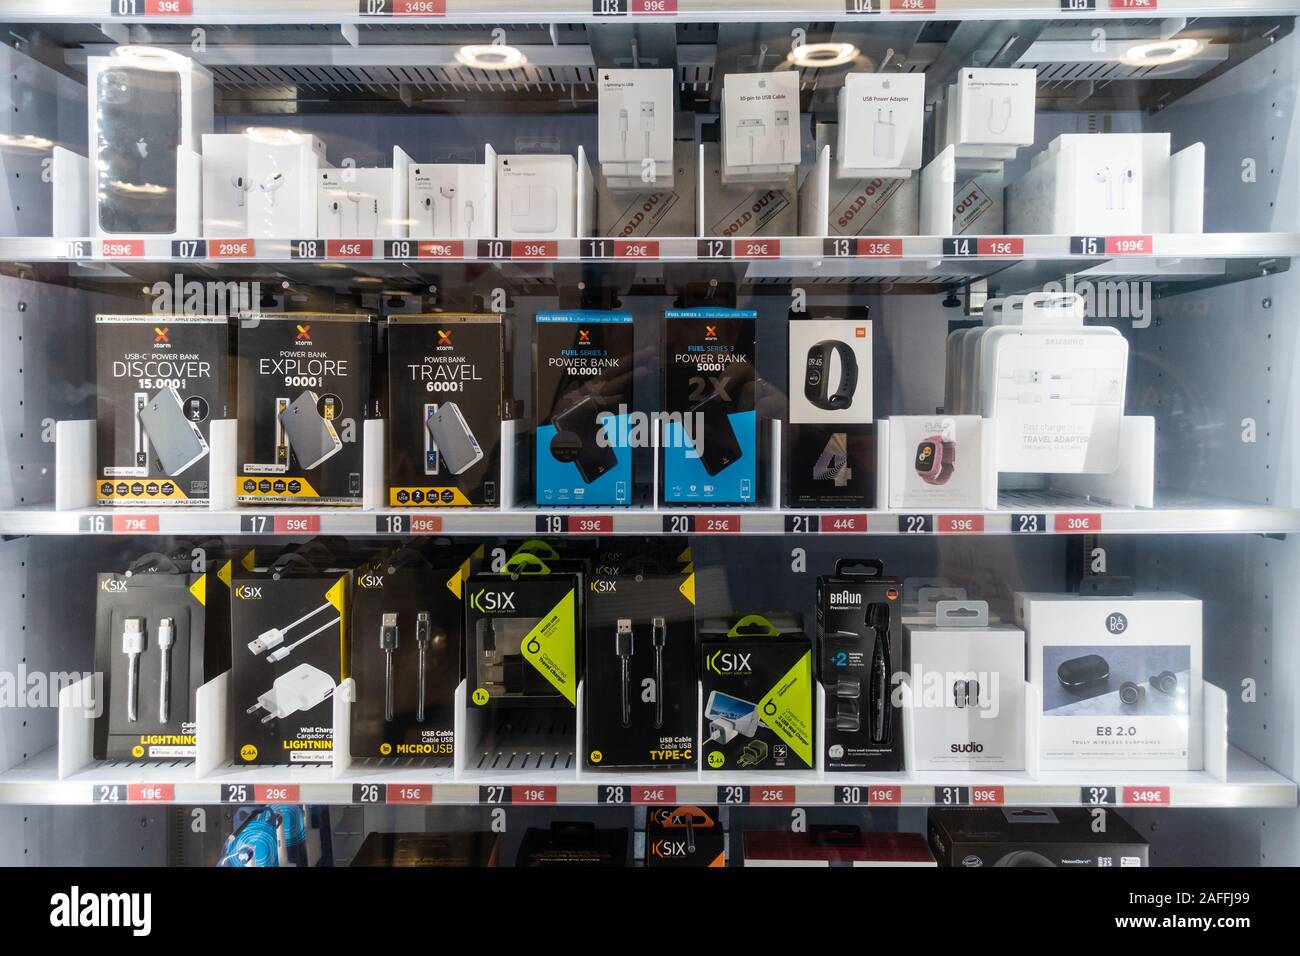 Vending machines owned by Tech & Fly allow customers to quickly buy technology devices in Madrid-Barajas Adolfo Suárez Airport, MAdrid, Spain Stock Photo